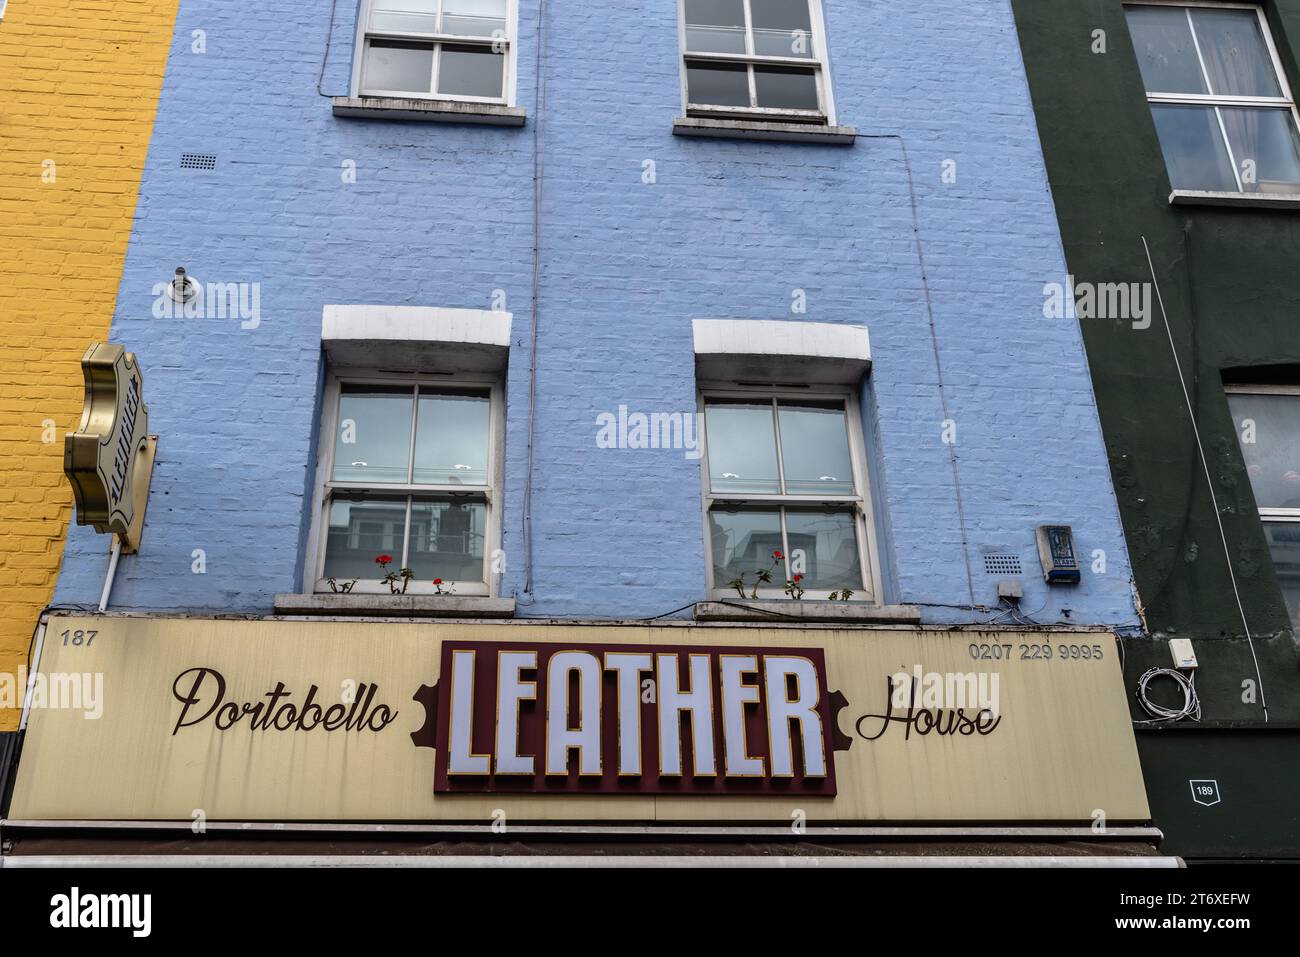 London, UK- August 26, 2023: Antiques and vintage Stores in Portobello Road in Notting Hill. Leather House Stock Photo